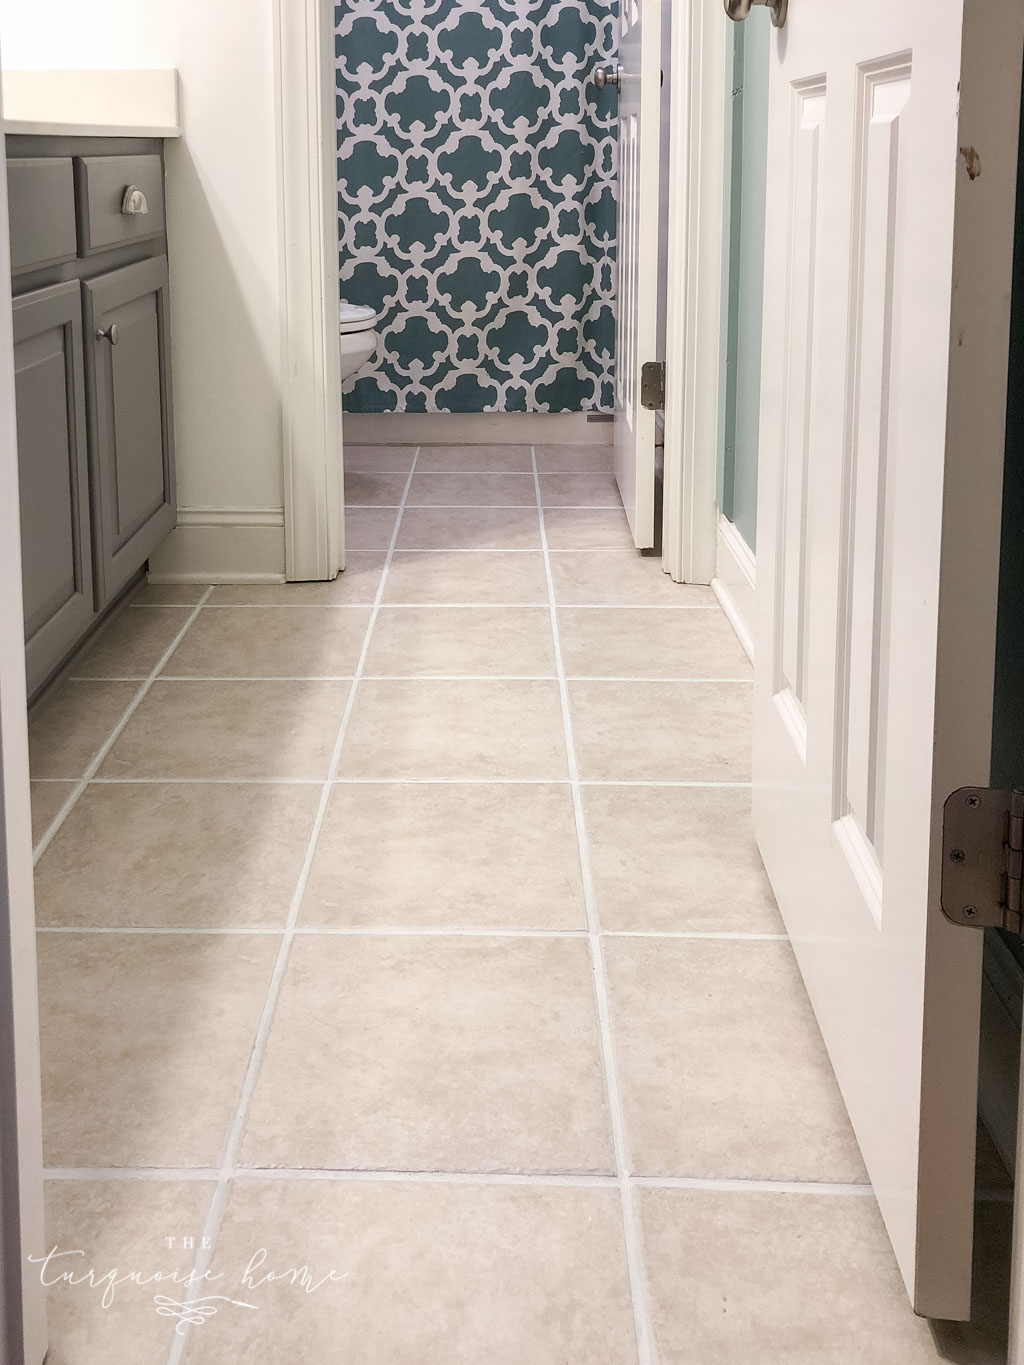 How to use grout paint and make grout white again! Beautiful after effect with just a couple hours!